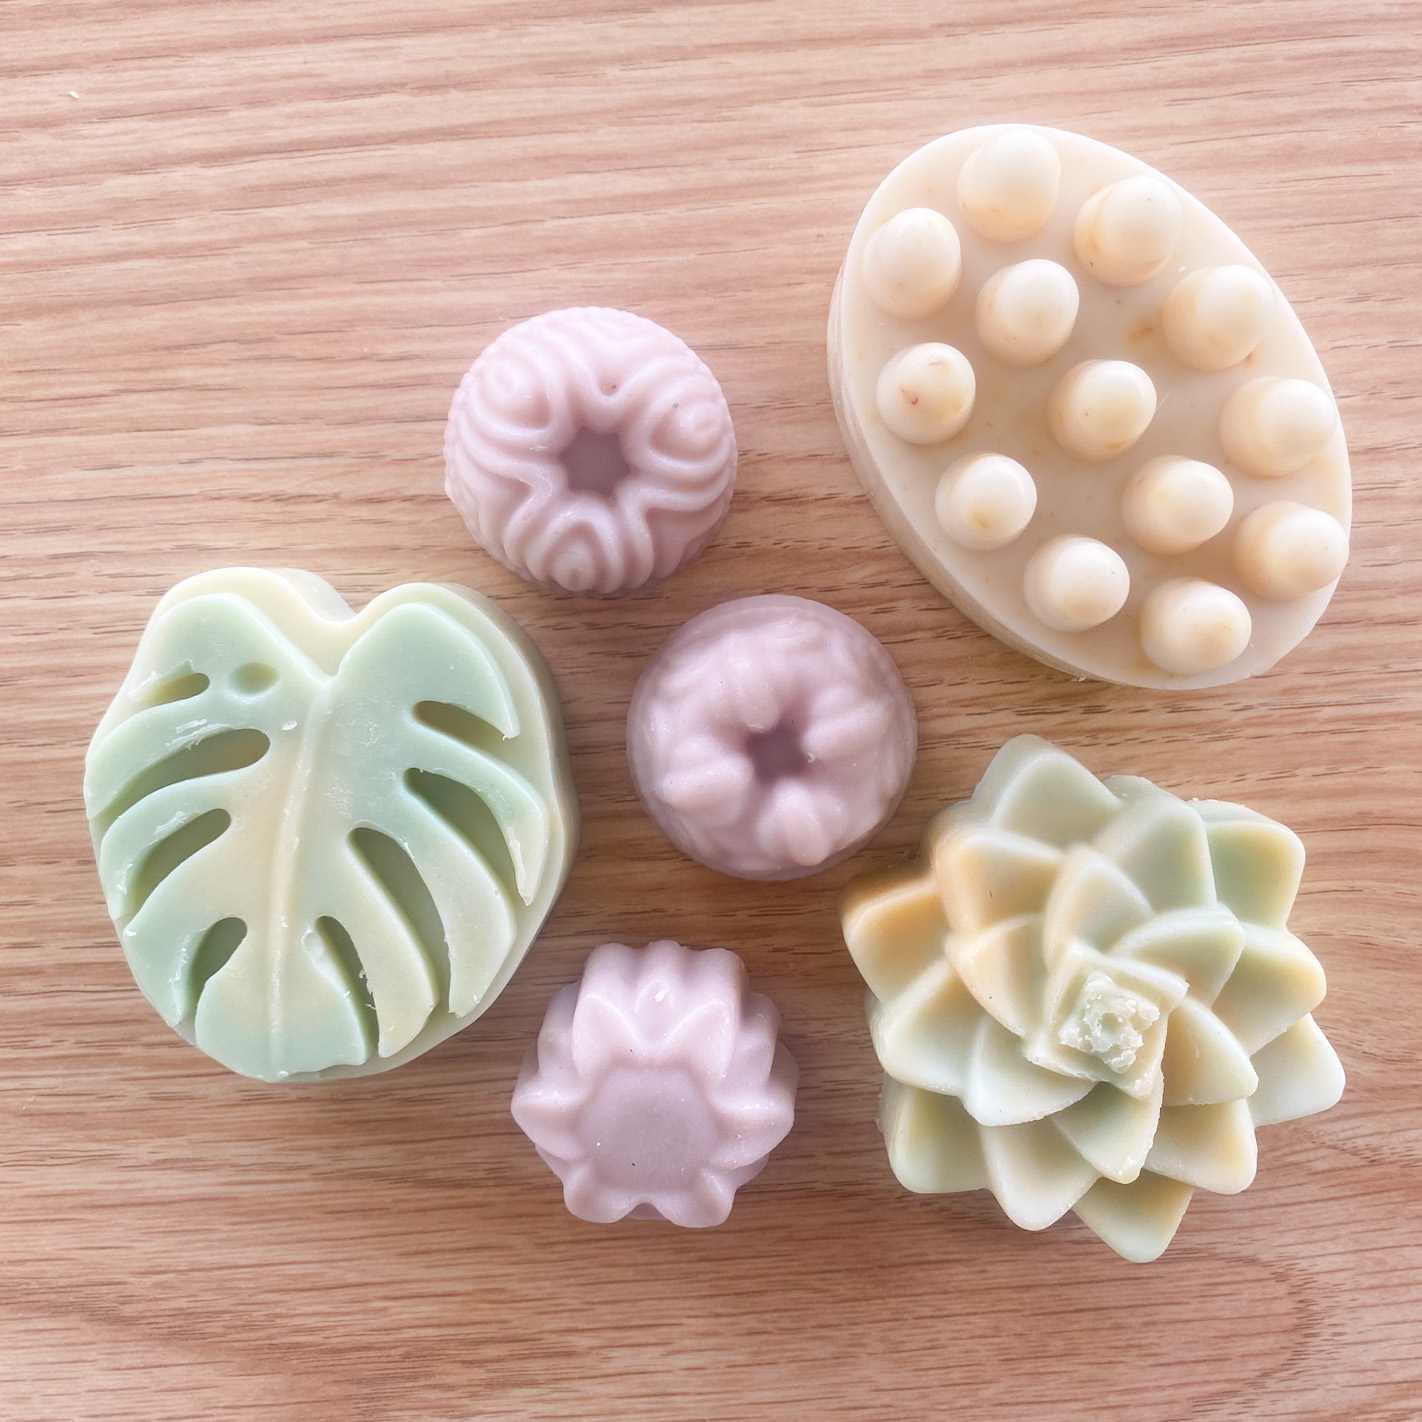 Money Soap Tutorial, Make Your Own Soap Gifts!